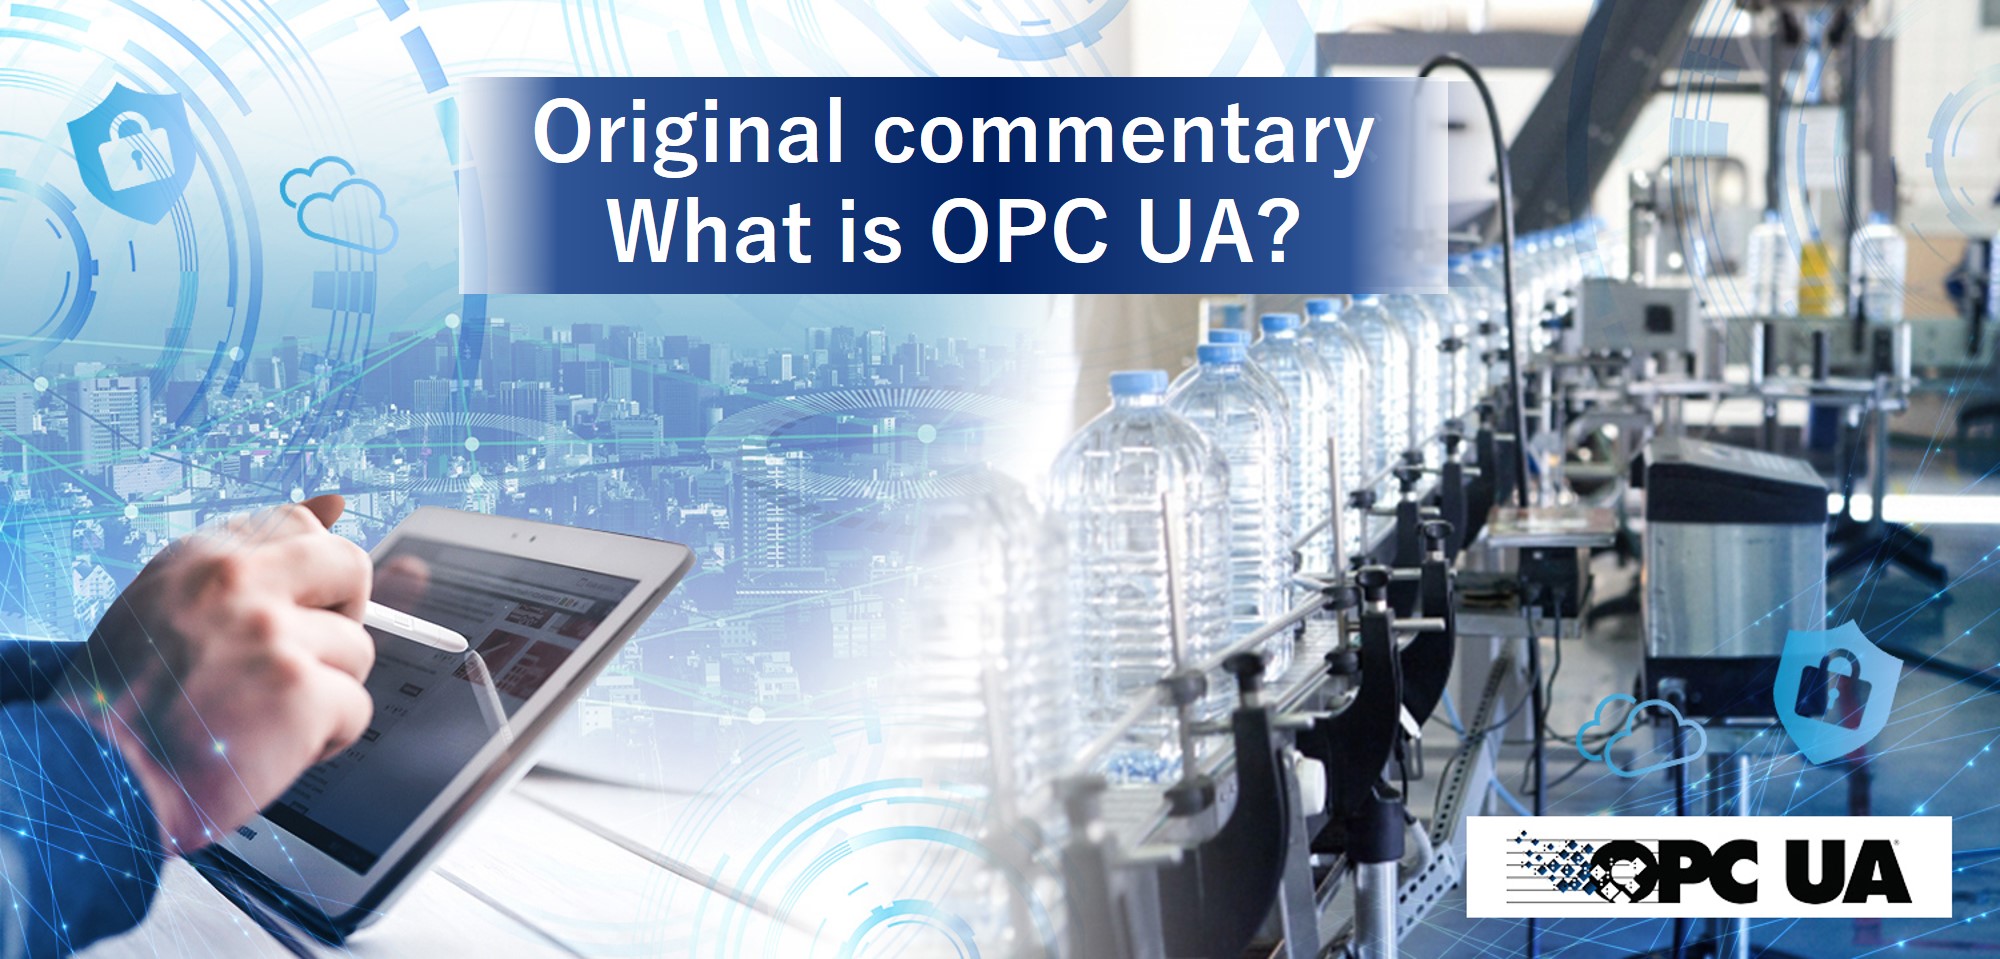 8. Case Study: Winder with OPC UA to Meet Italian Industry 4.0 Plan | OMRON Industrial Automation